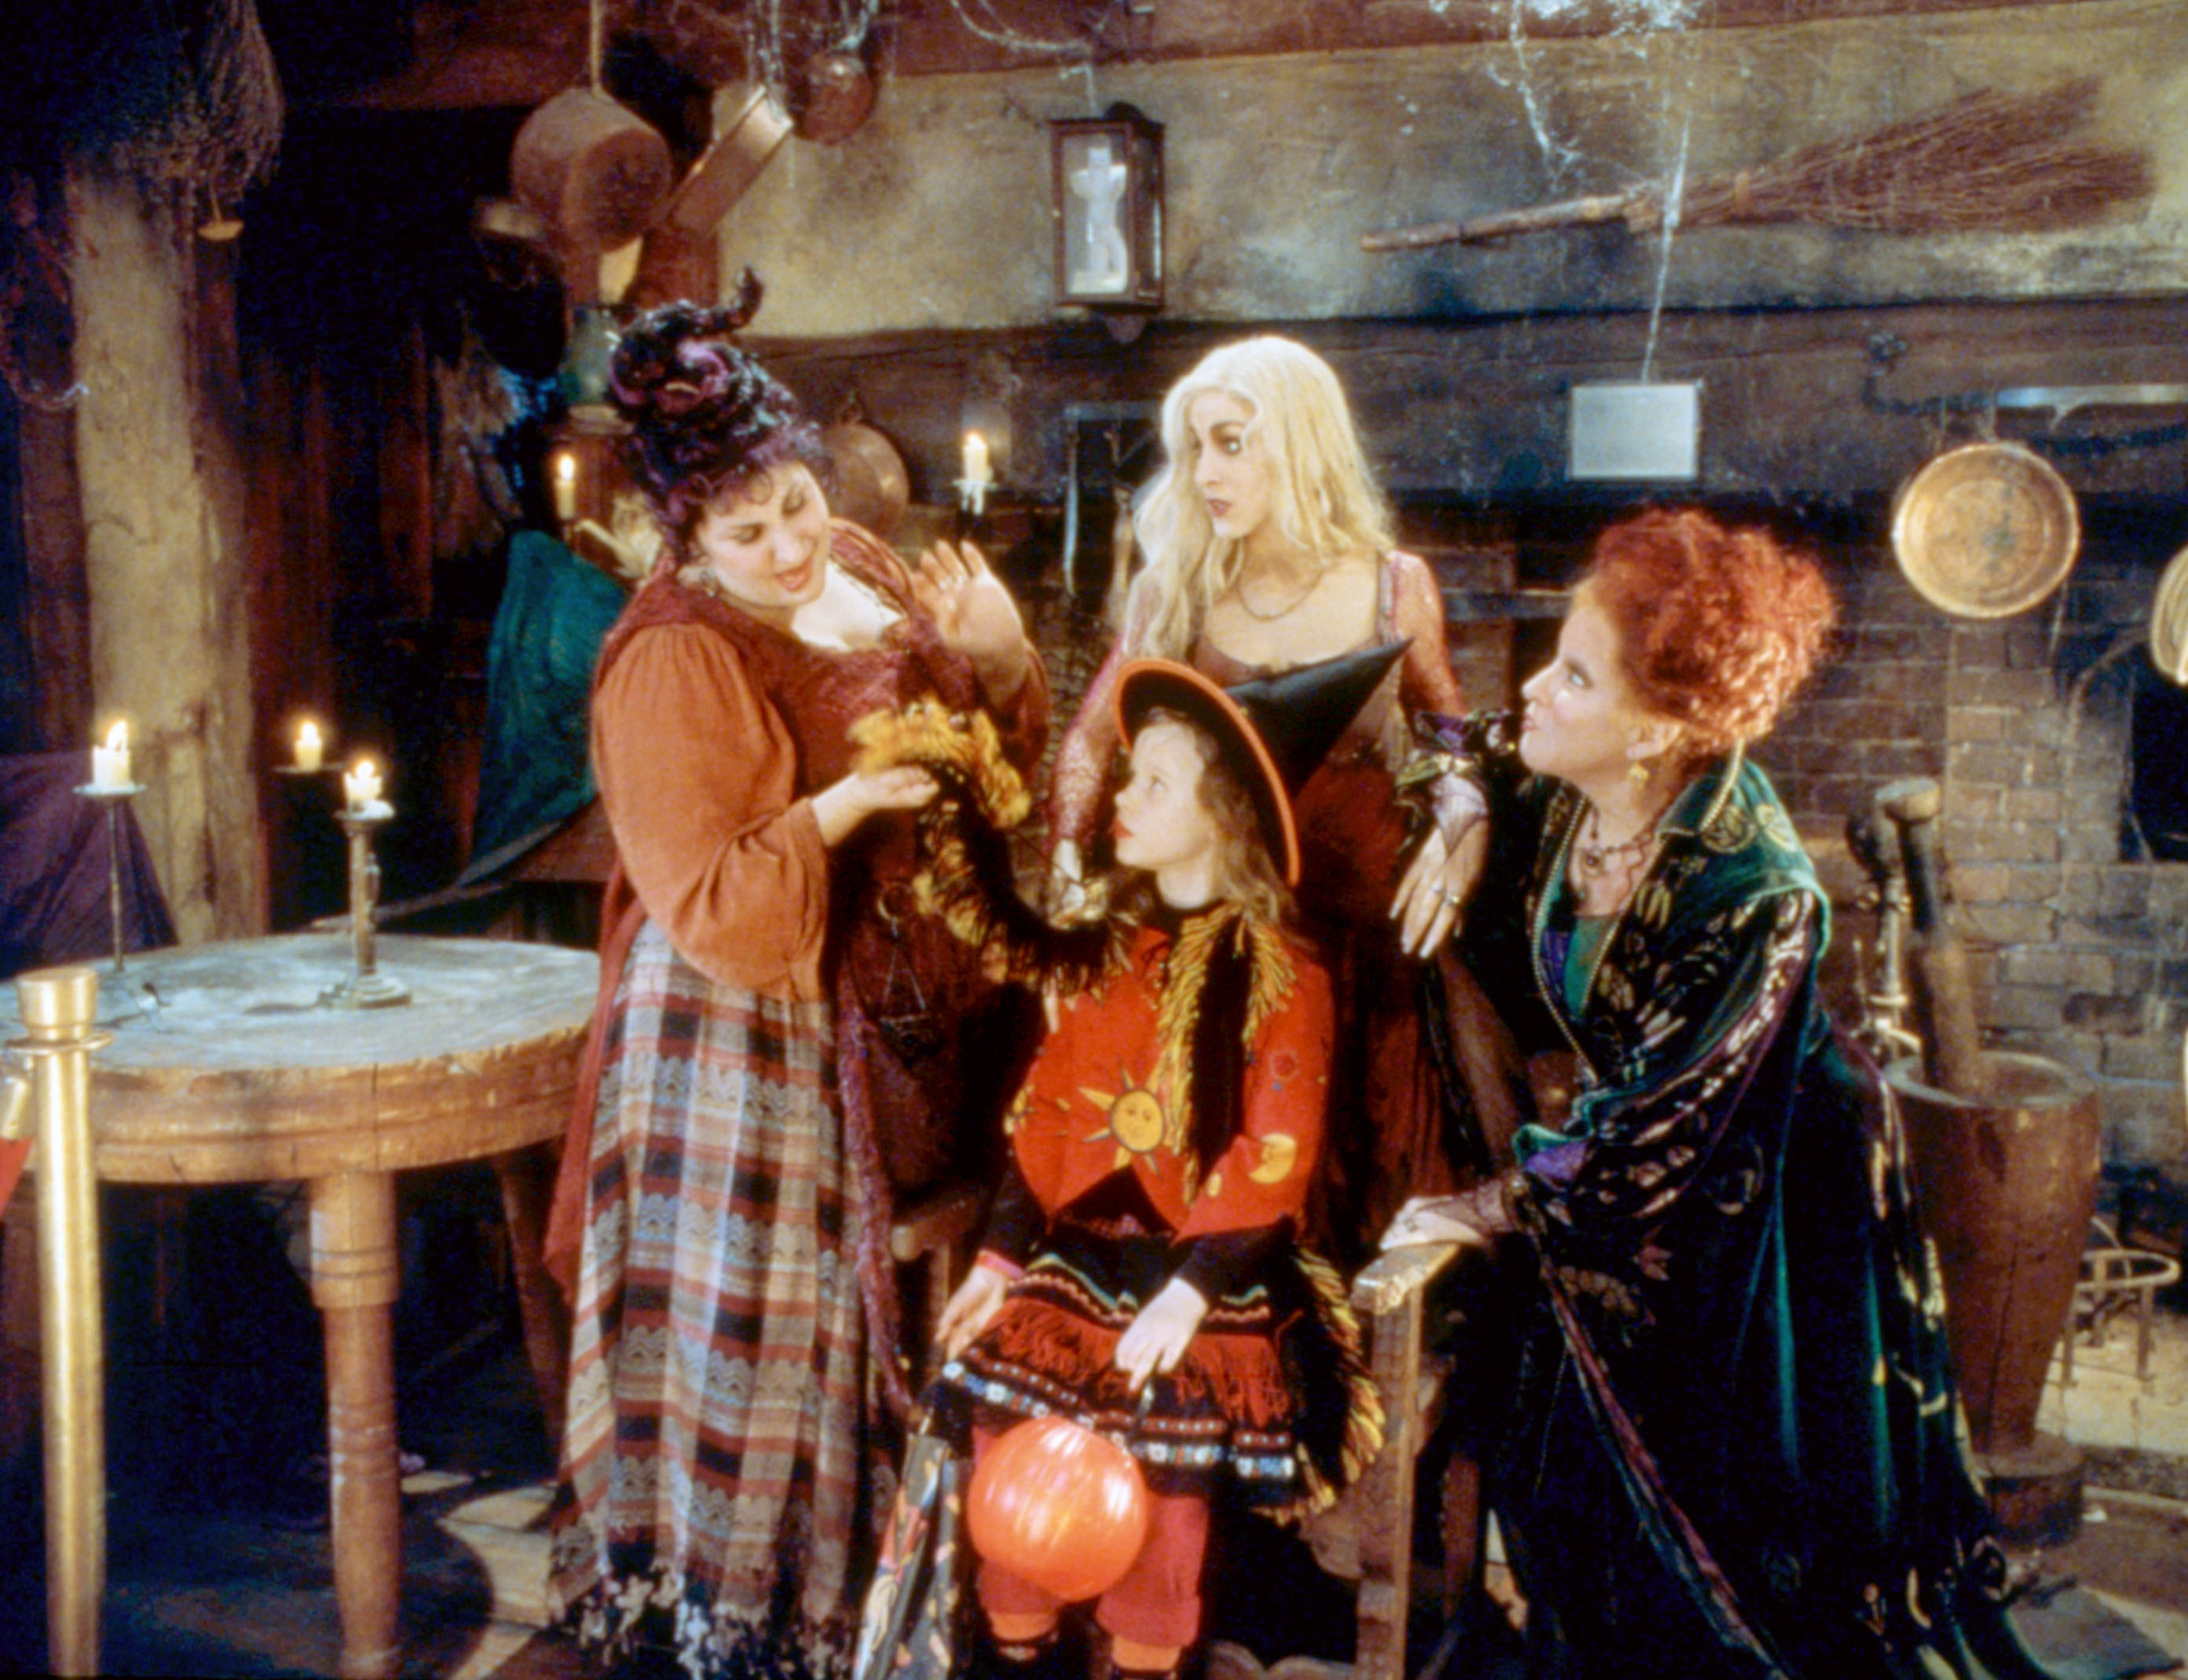 The Sanderson sisters standing around a young girl carrying a pumpkin candy holder